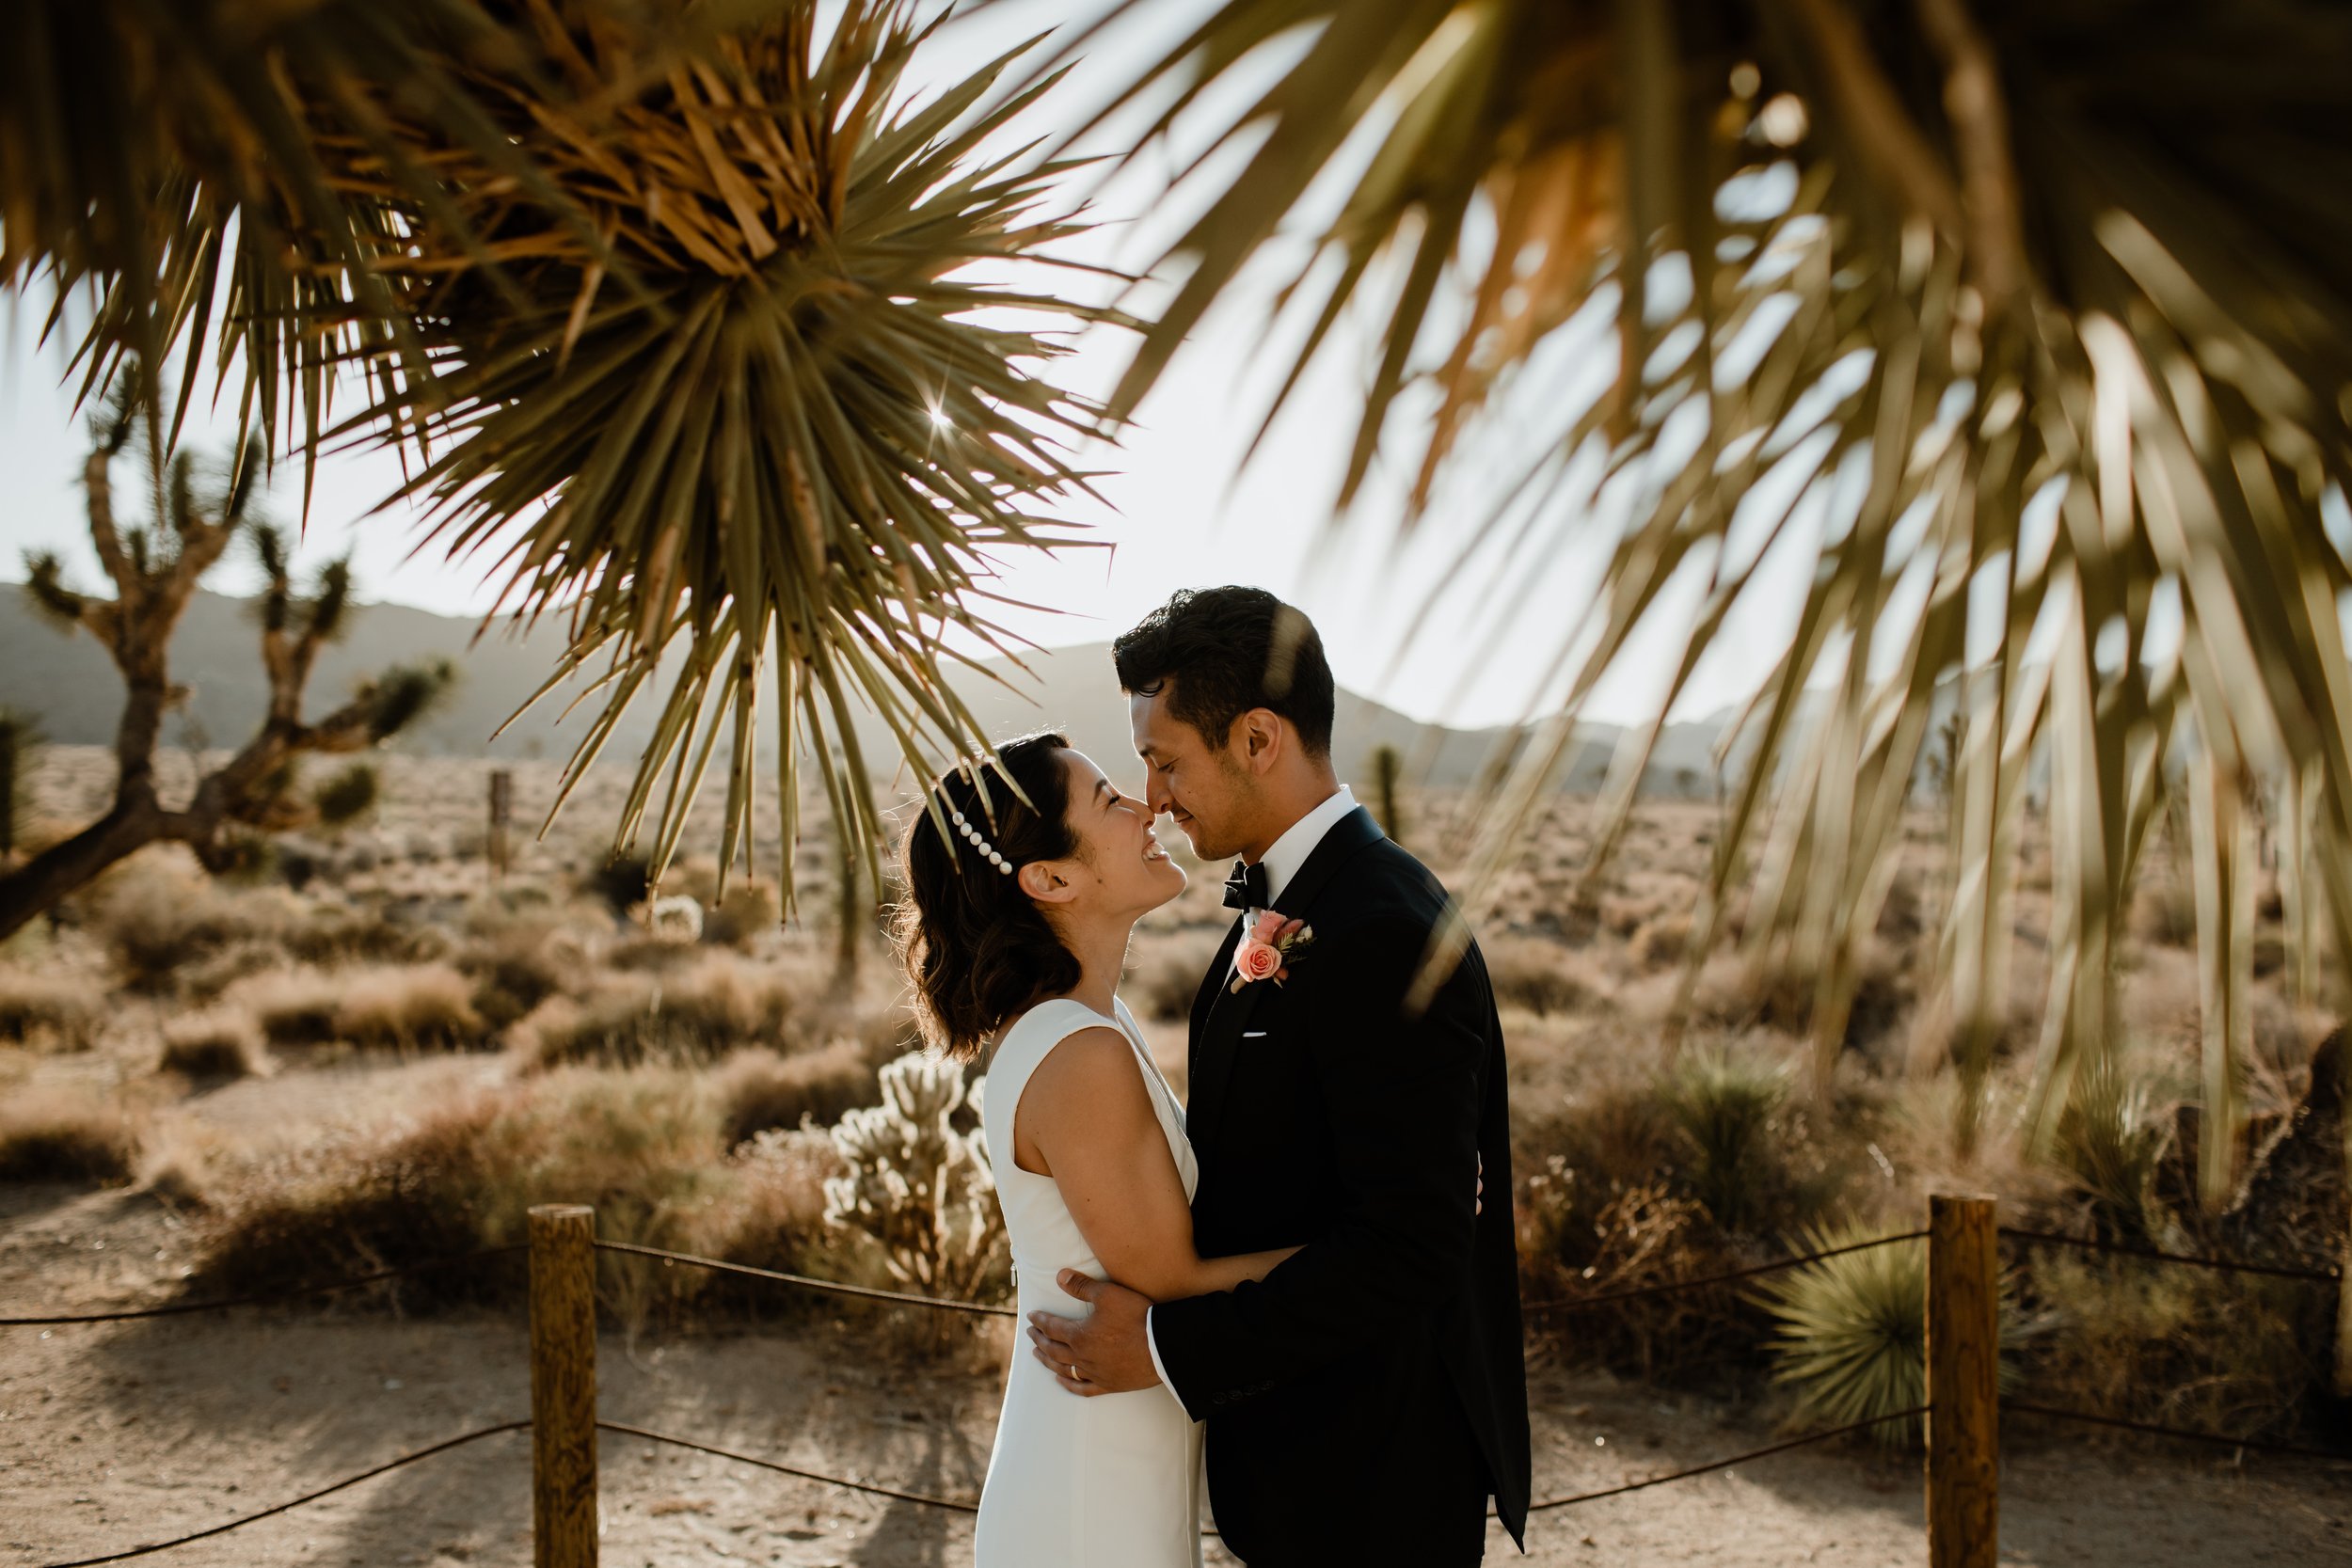  Michelle and Michael Wedding - Joshua Tree Elopement - Eve Rox Photography 